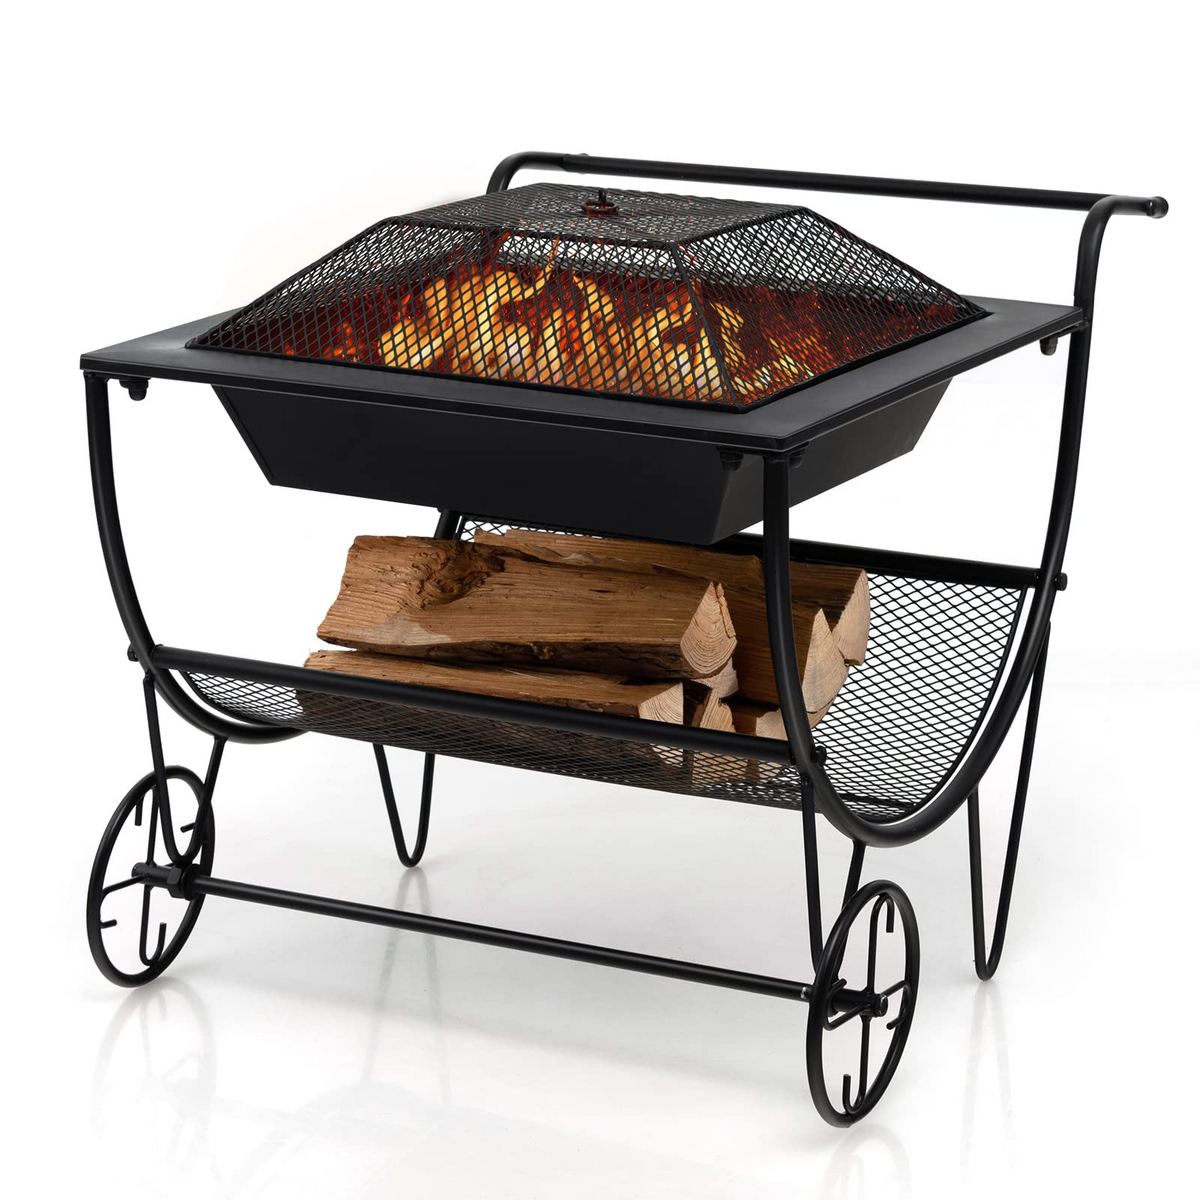 Goplus Outdoor Fire Pit with Wheels, 27.5" Small Bonfire Pit with Spark Screen - GoplusUS